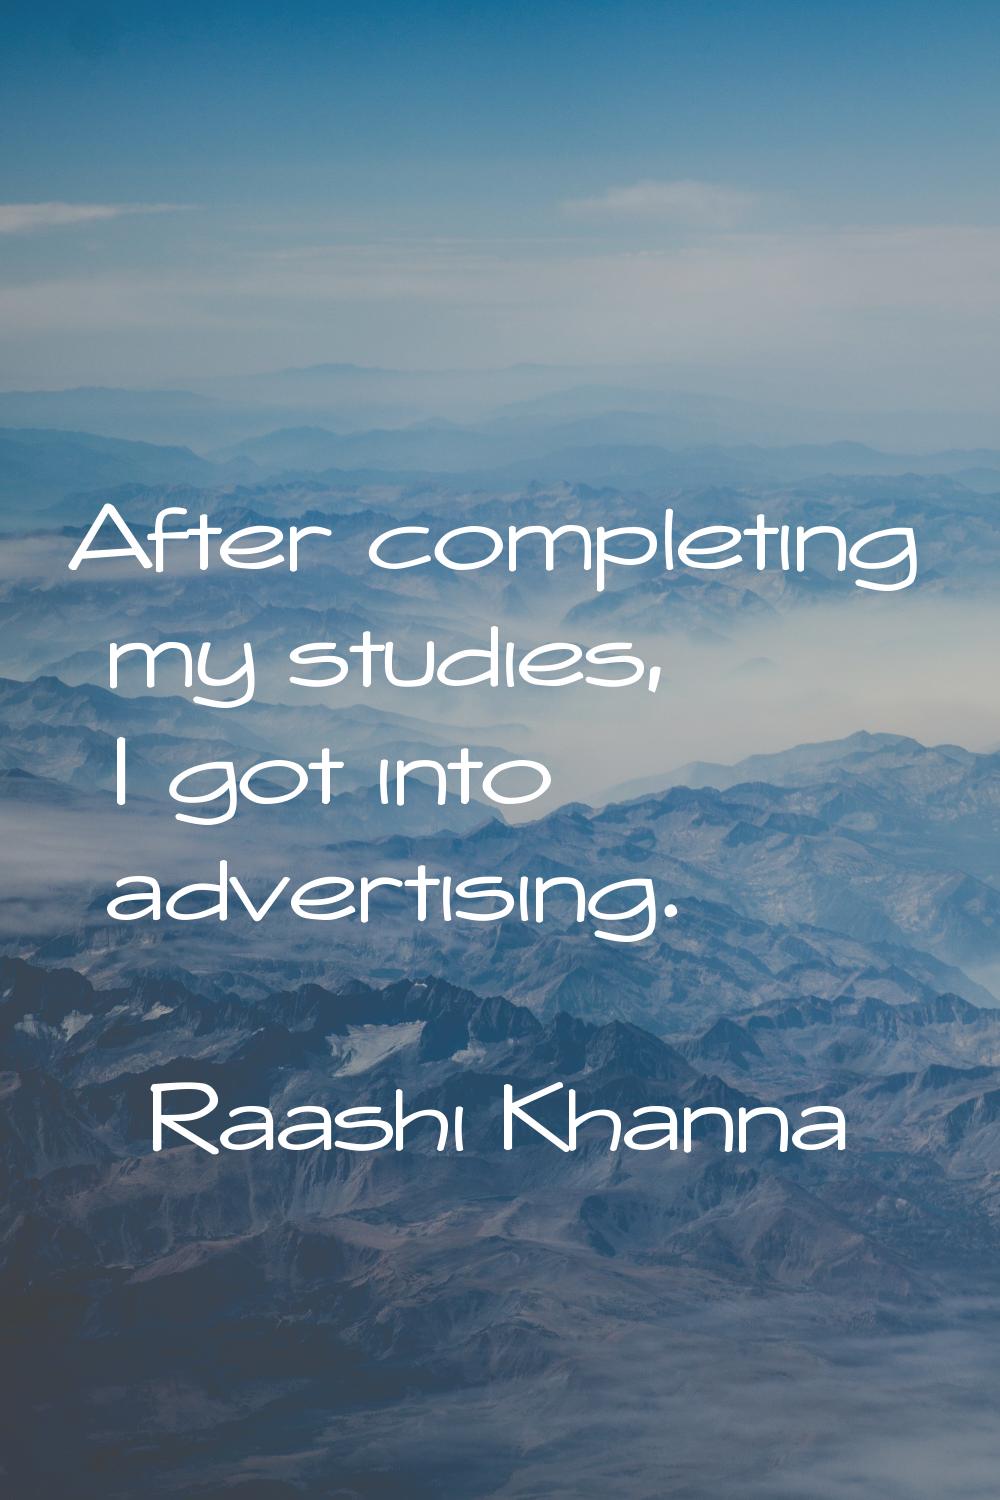 After completing my studies, I got into advertising.